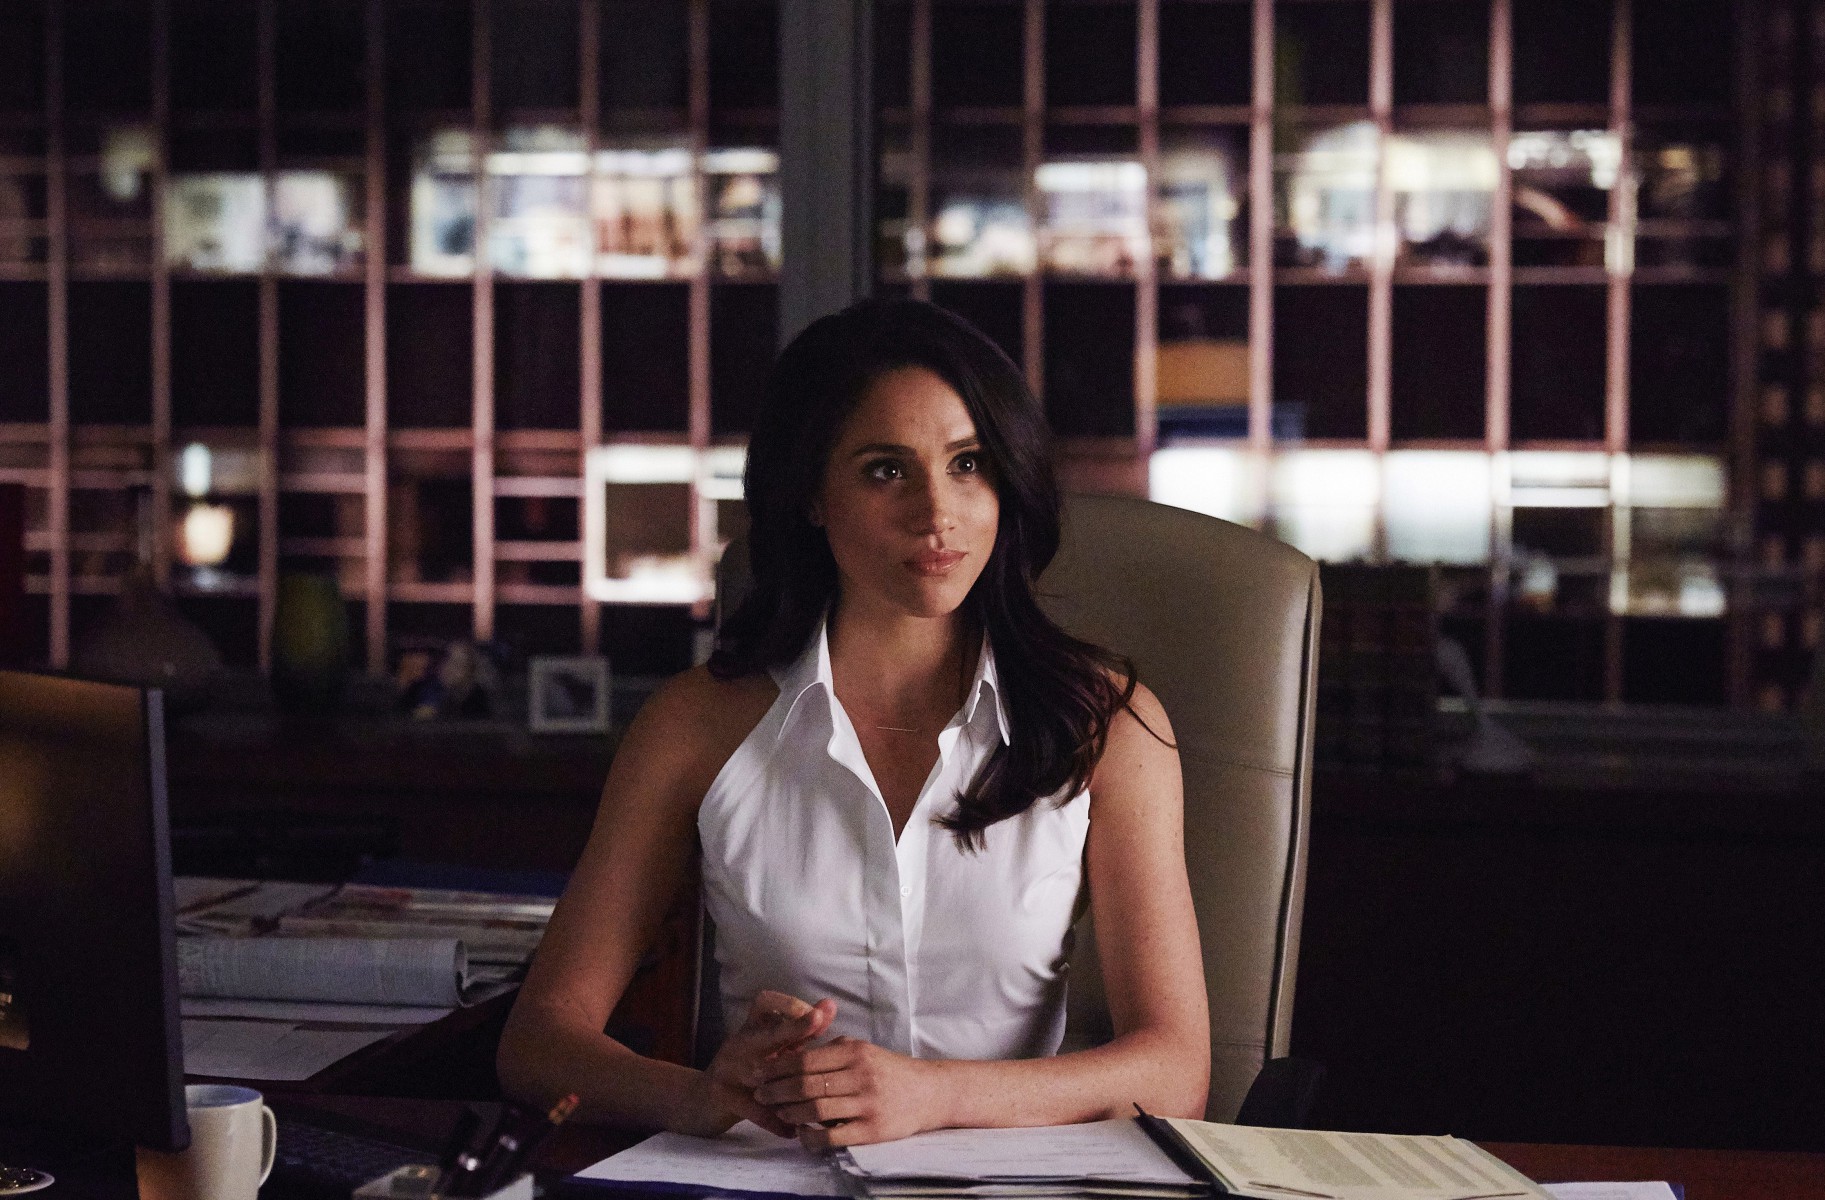 Meghan spent six years living in Toronto while filming Suits